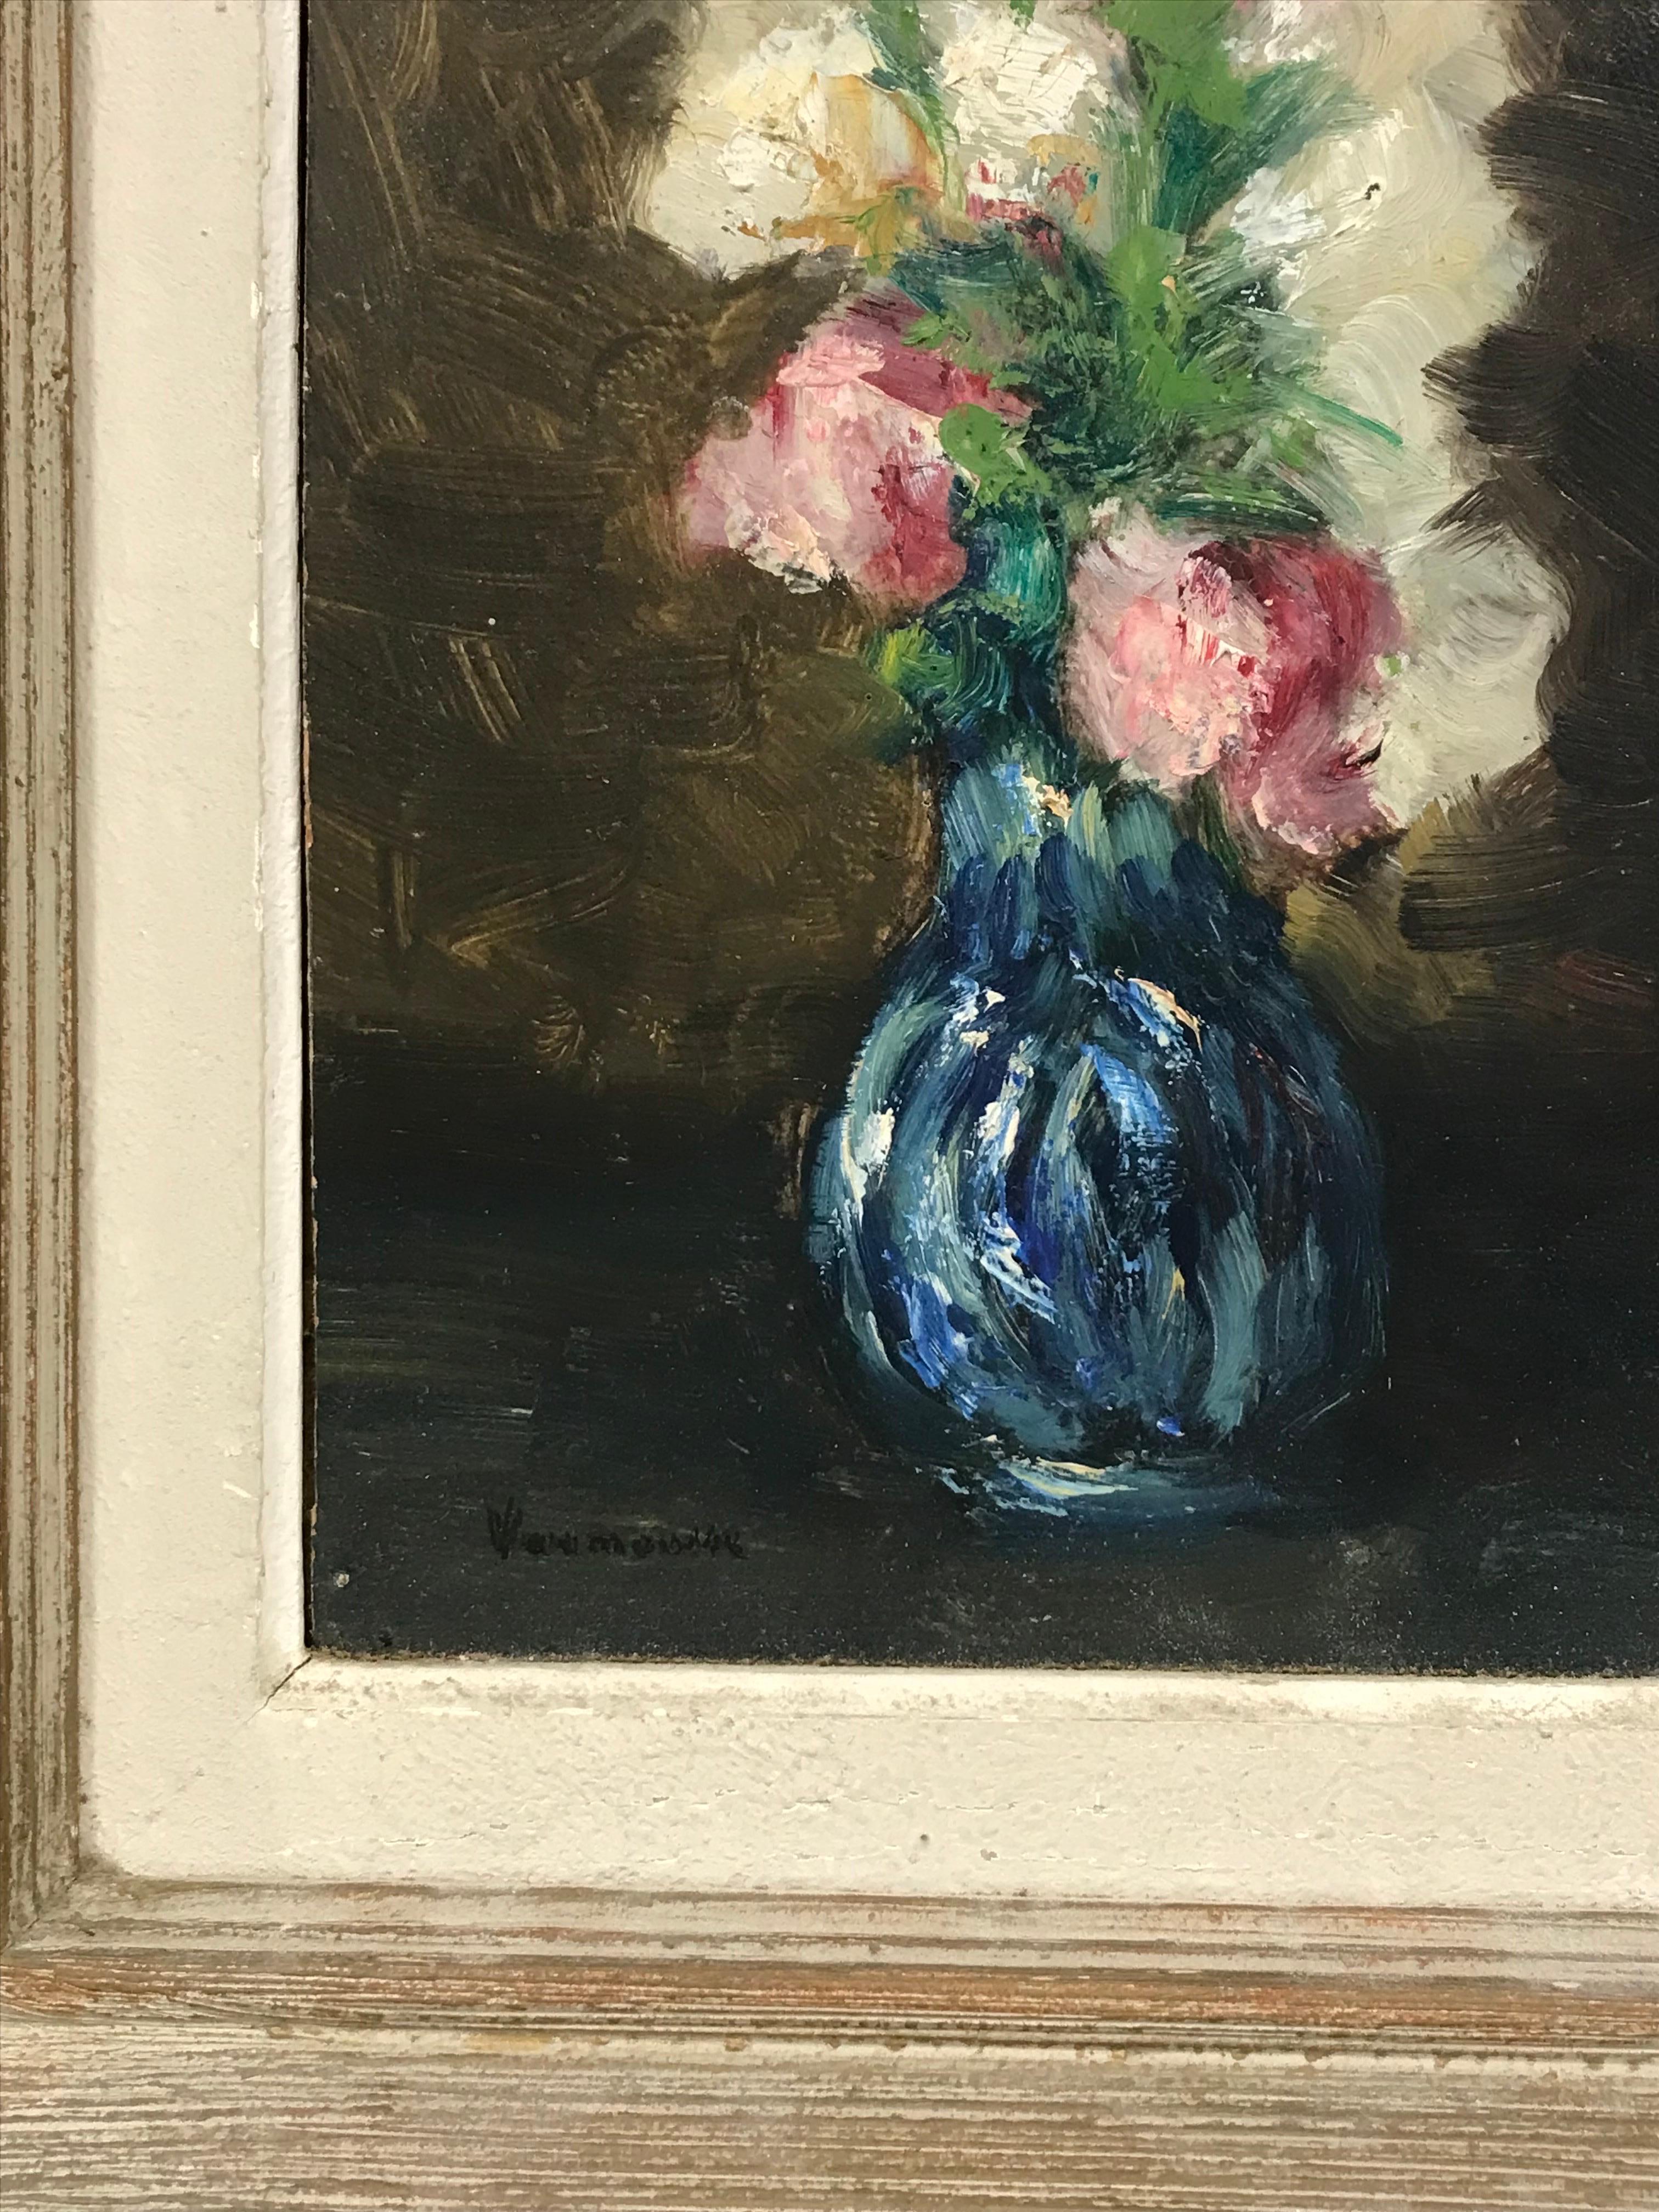 Artist/ School: French School, mid 20th century, signed lower left

Title: Pink & White Flowers in a Blue Vase

Medium:  oil on board, framed

framed: 15 x 12 inches
board: 10 x 7 inches

Provenance: private collection, France

Condition: The